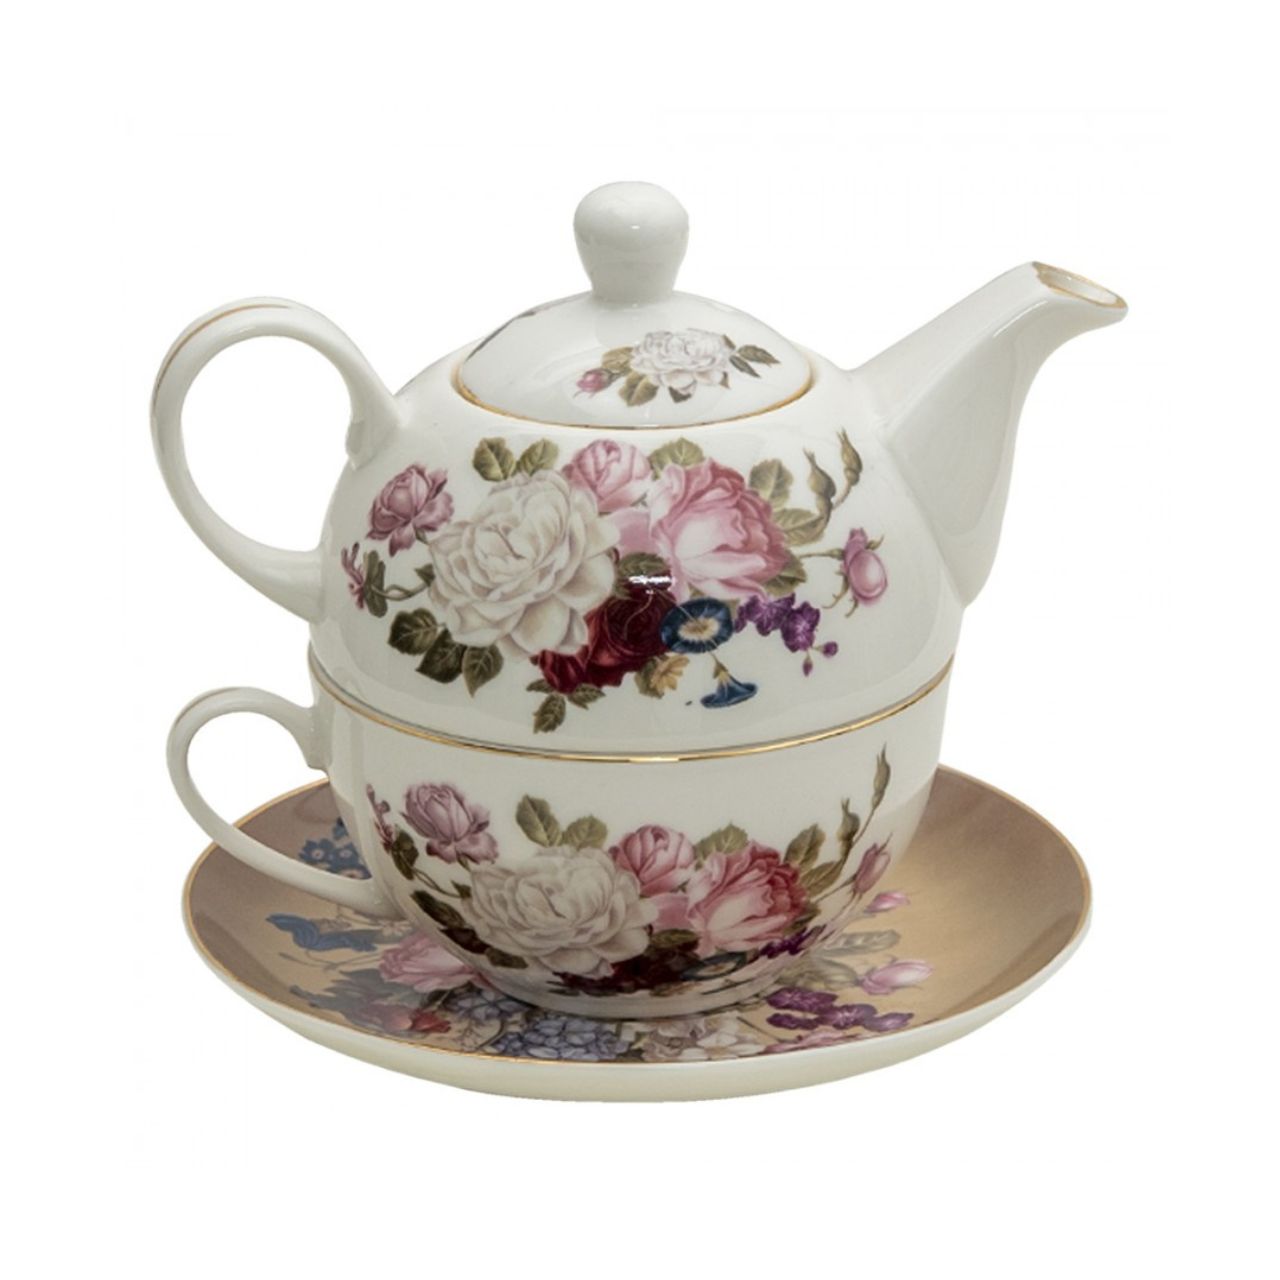 Treat yourself with a teapot and cup in one! The tea-for-one pots are - as the name says - for one person. The perfect time to pamper yourself. But also an idea to give as a gift for those who really love tea. Enjoy your cup of tea in peace!